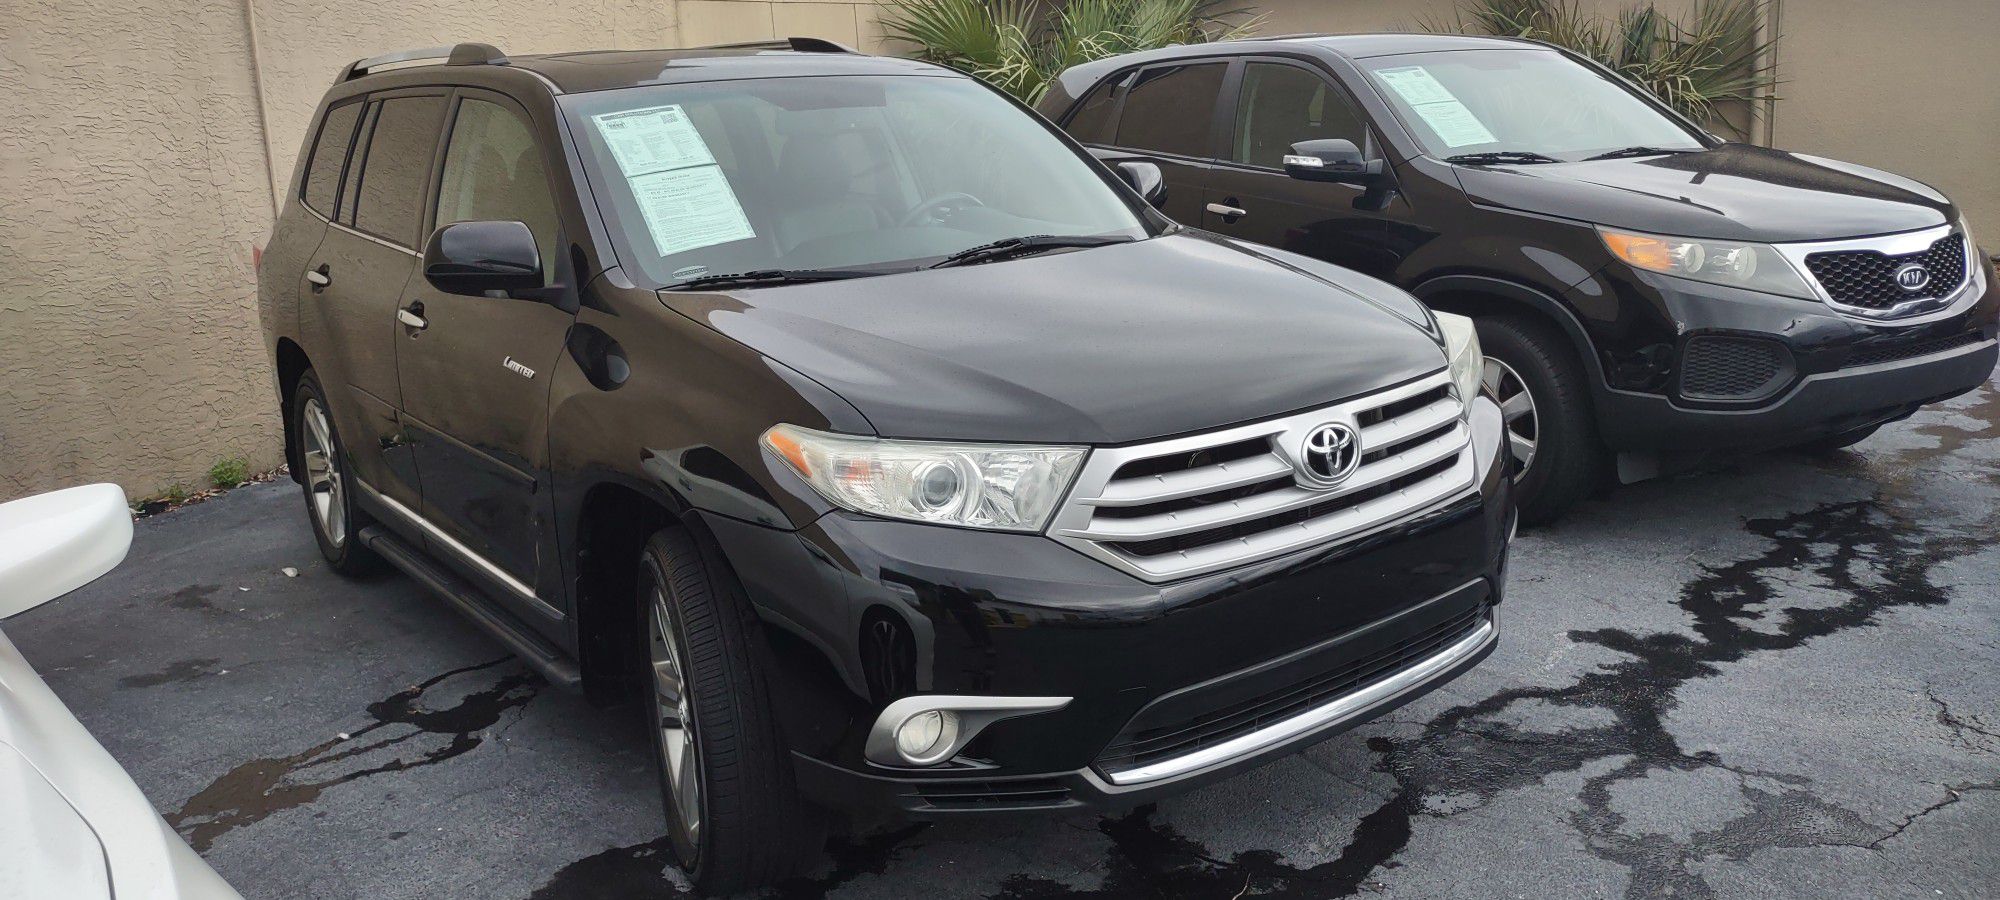 TOYOTA HIGHLANDER 2011/ BUY HERE PAY HERE